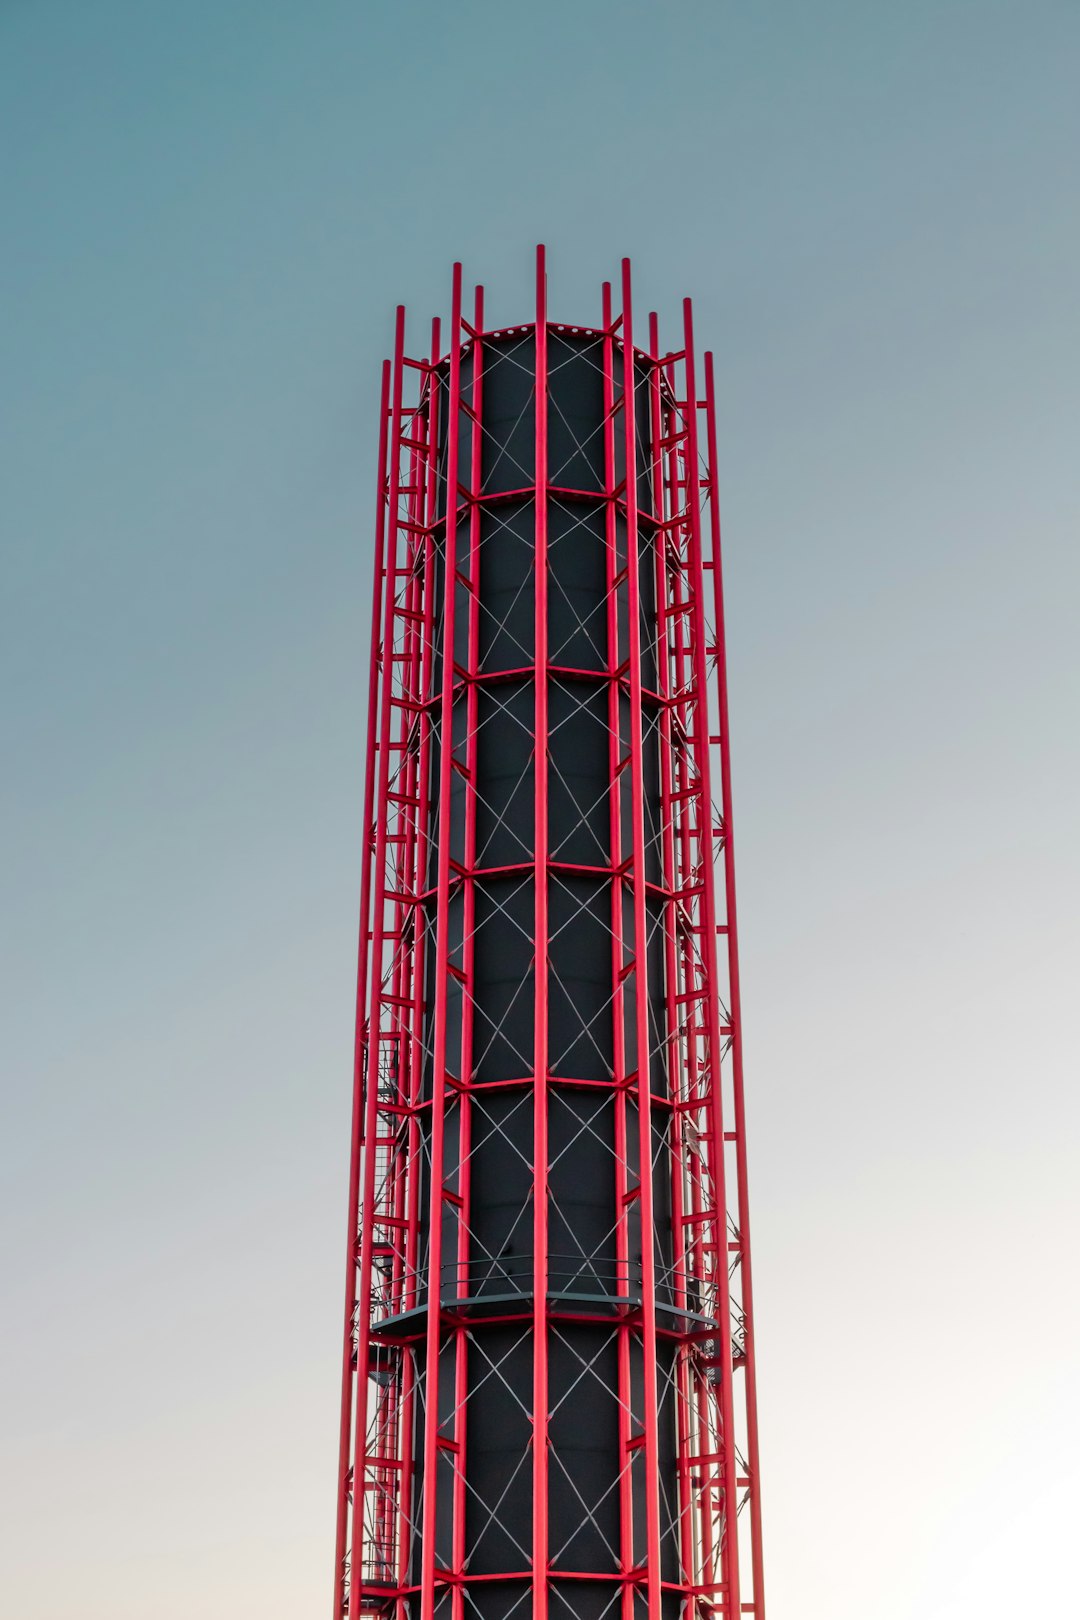 red tower under gray sky